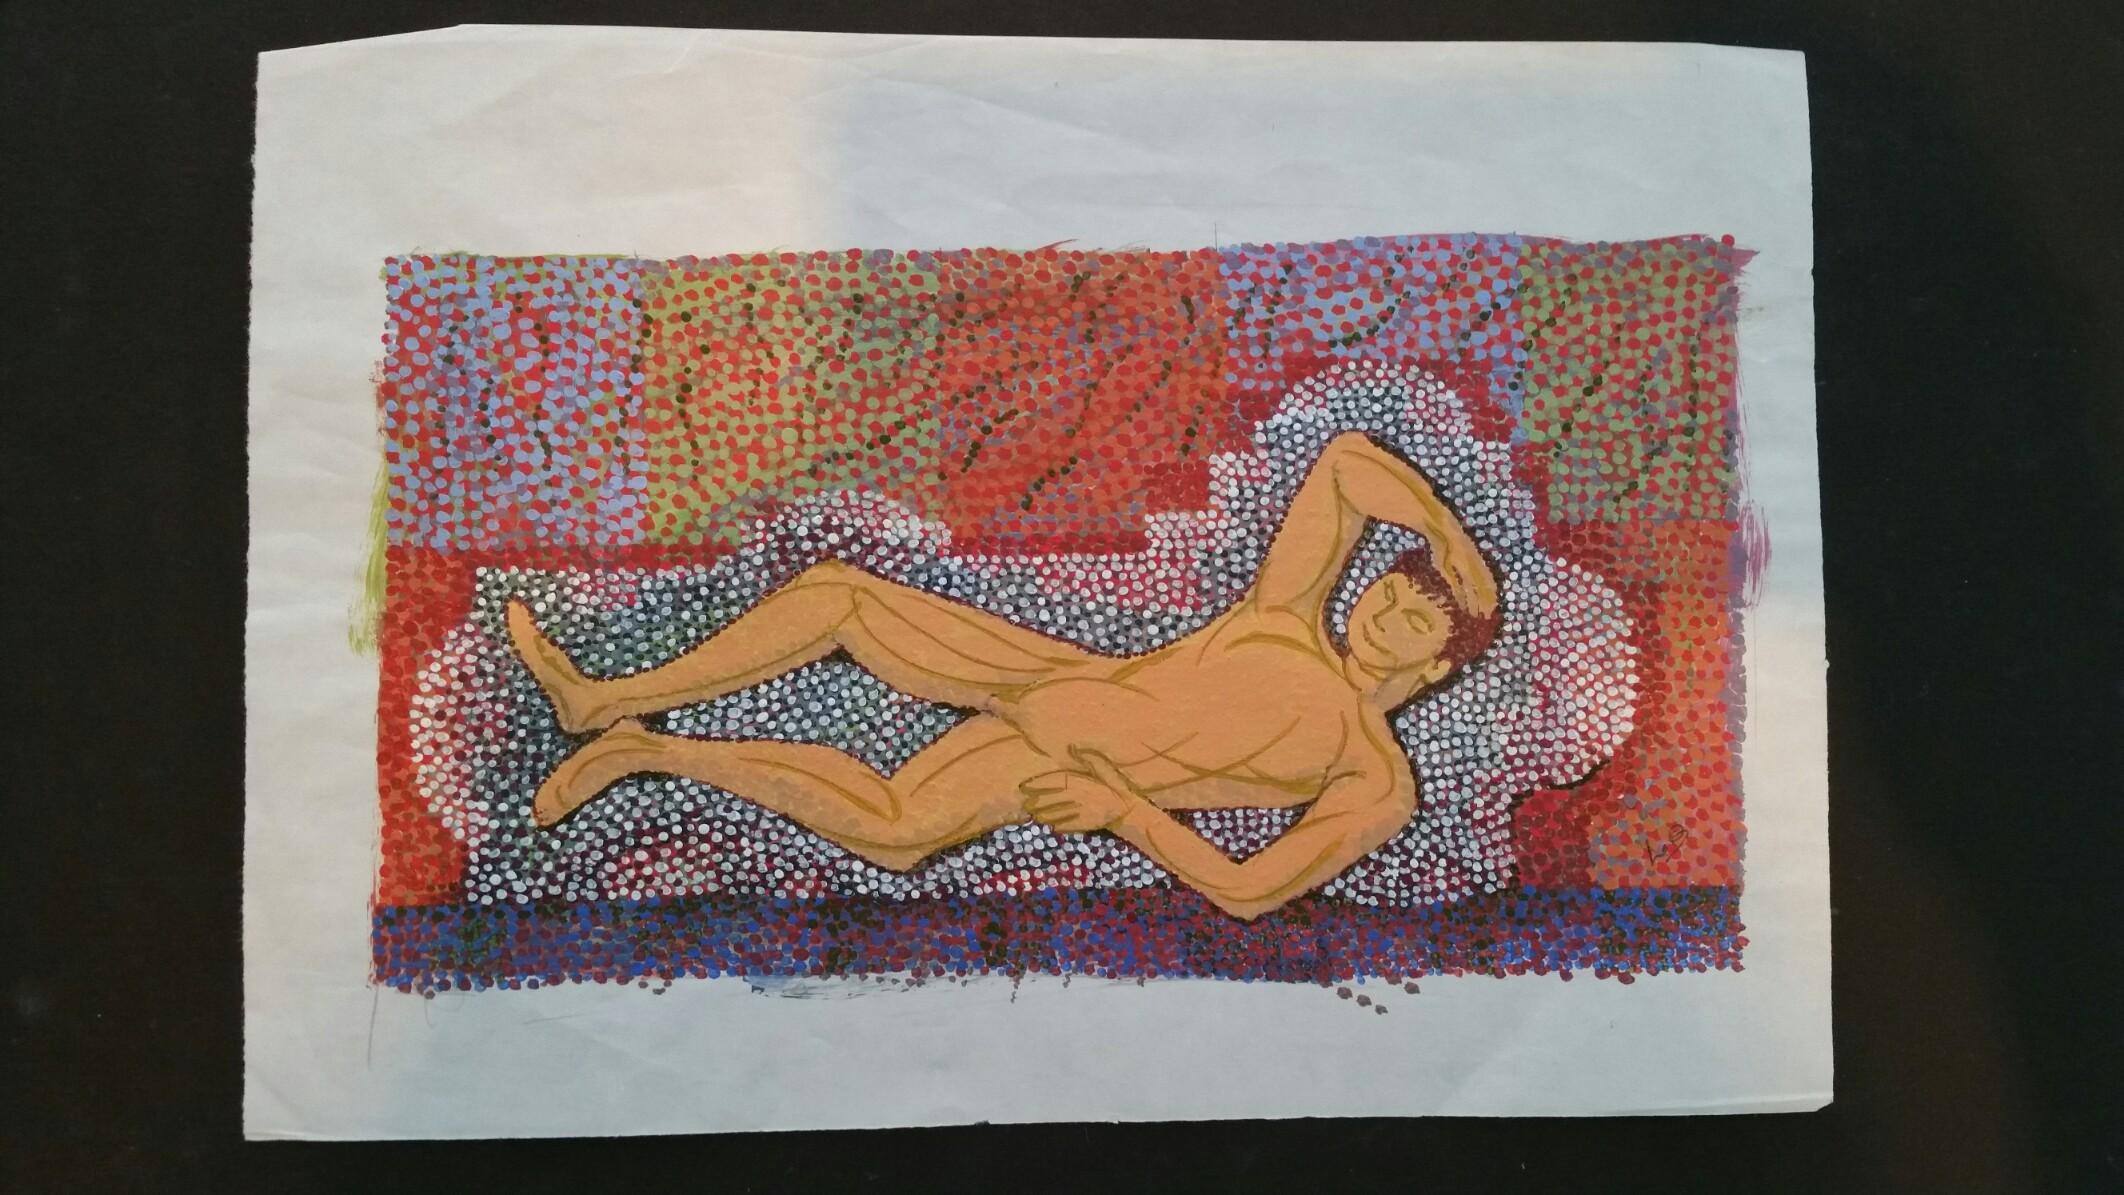 Pointillist Reclining Male Nude
by Louis Bellon (French 1908-1998)
initialled lower right
gouache painting on paper, unframed
measurements: 5.5 x 10 inches (overall the sheet measures 8.25 x 11.9 inches)

provenance: private collection of the